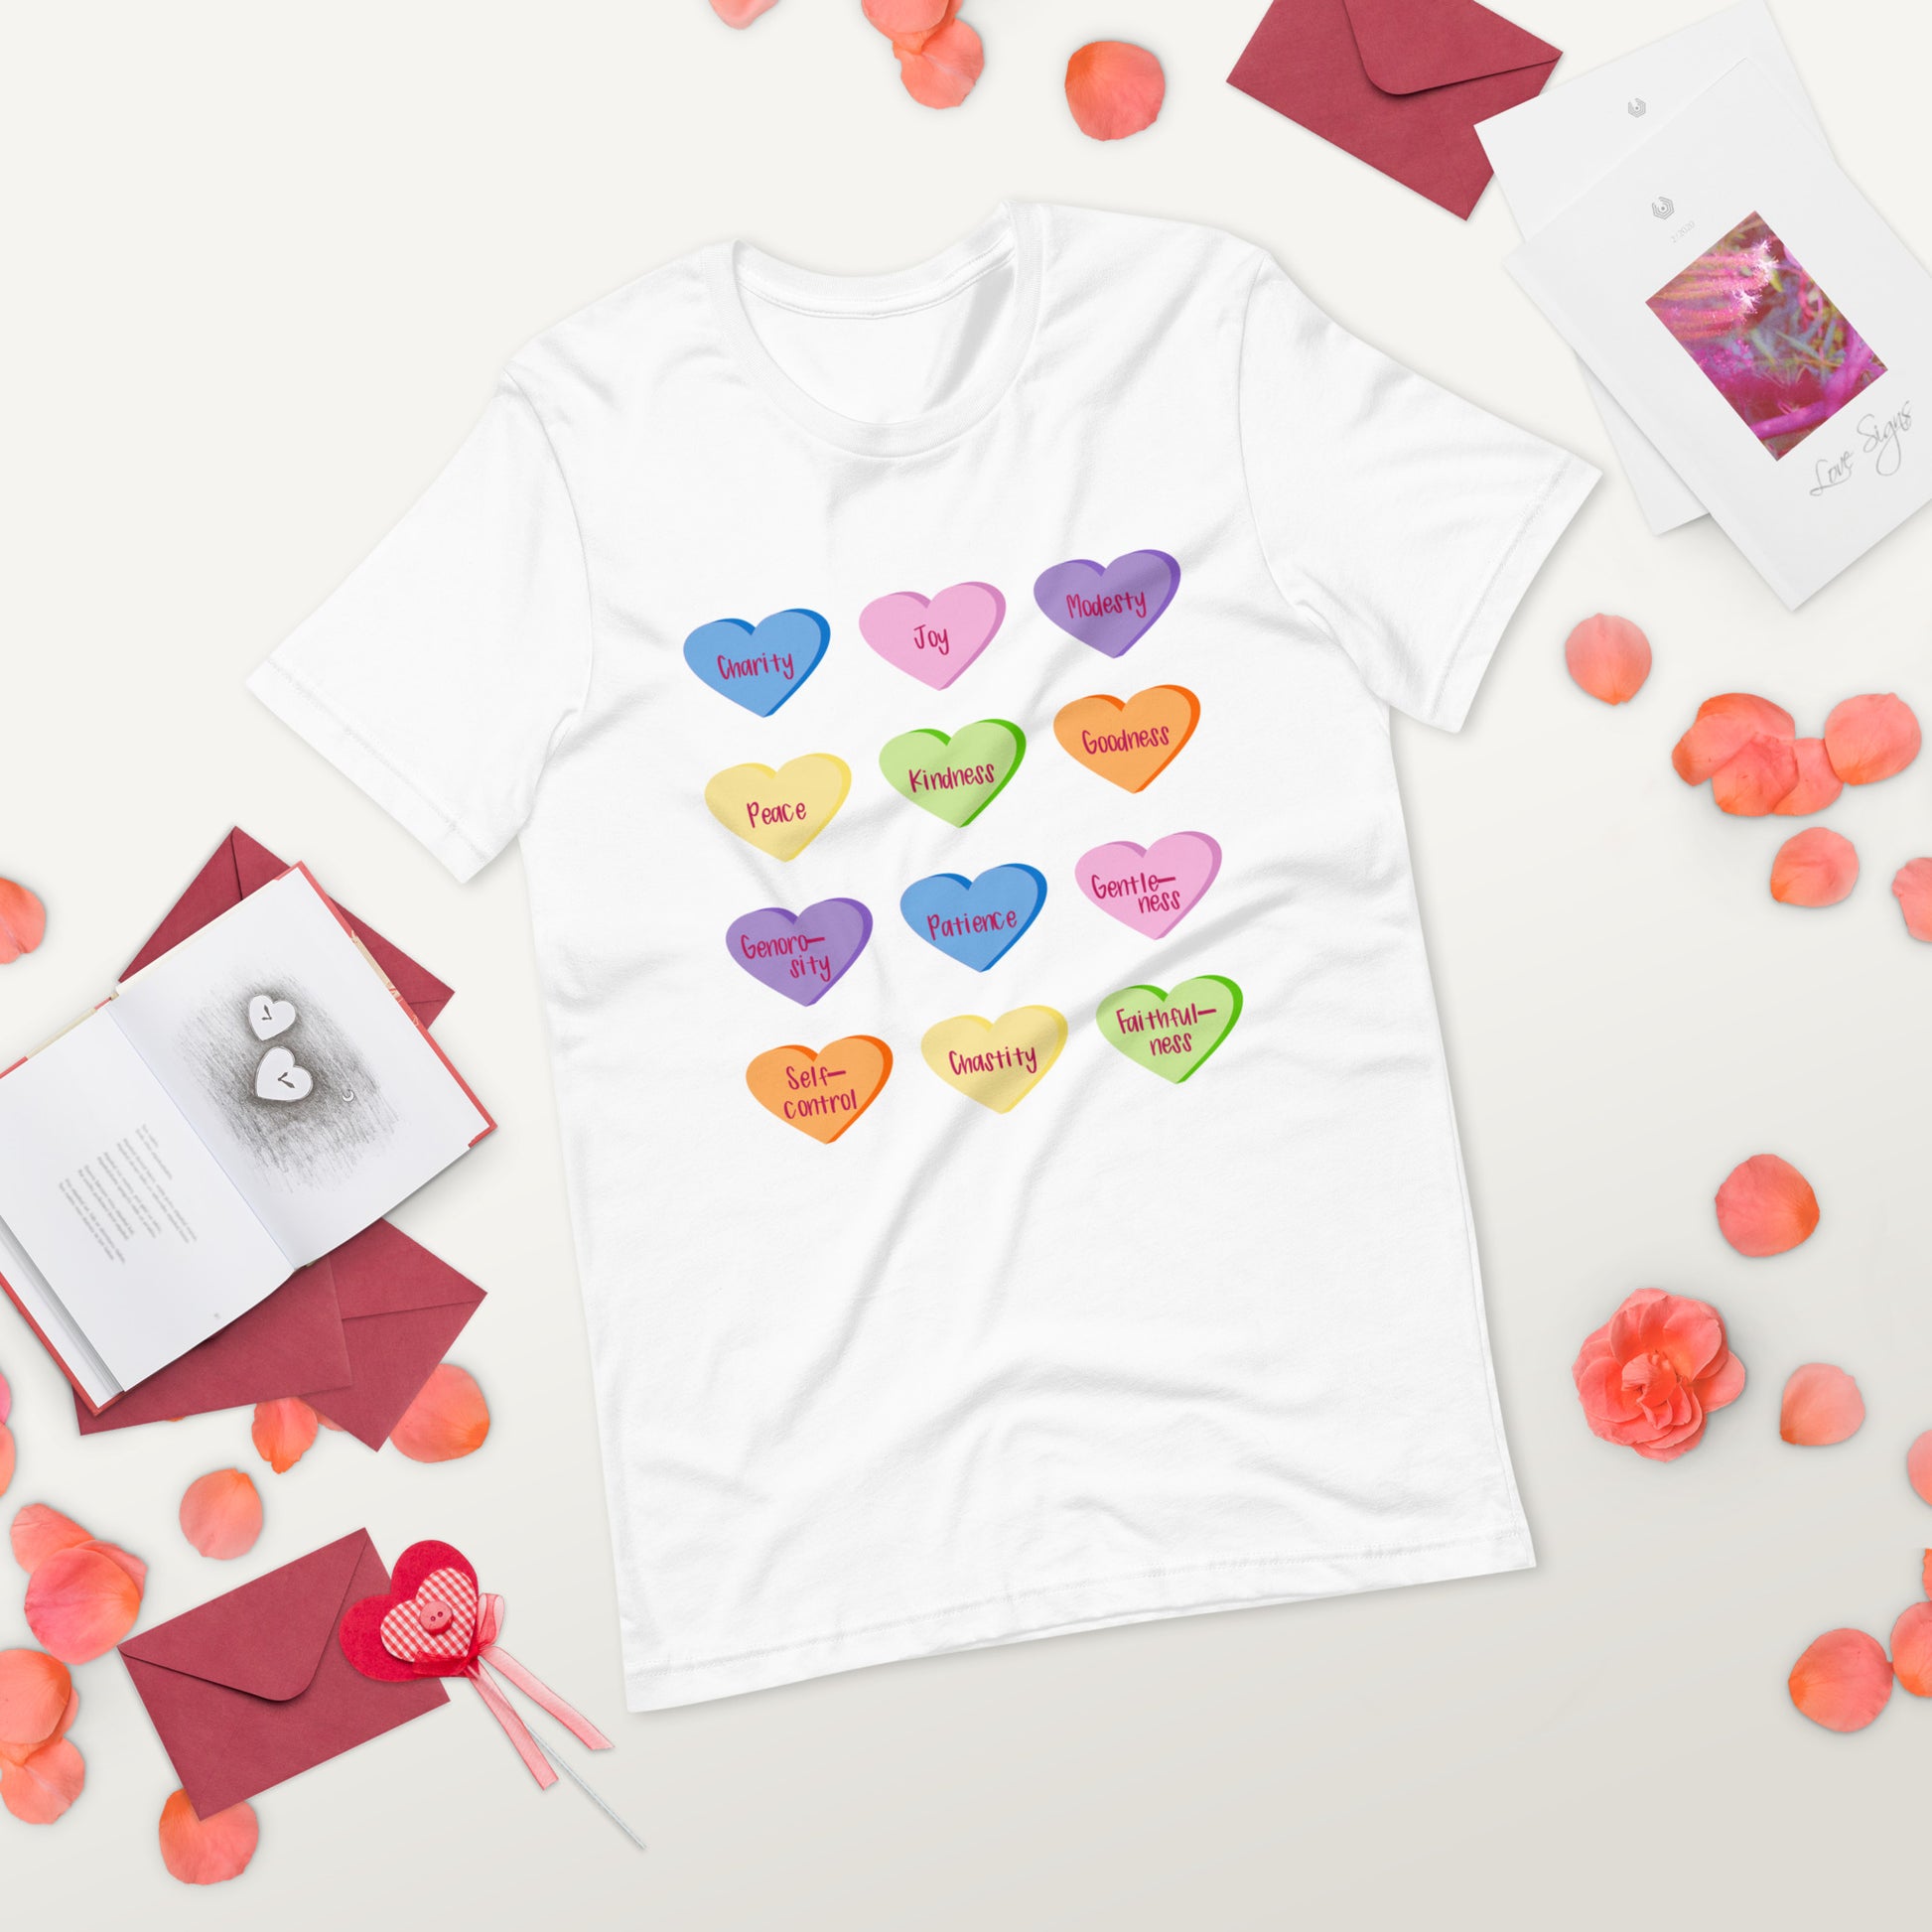 Fruit of the Holy Spirit Candy Hearts T-shirt in white